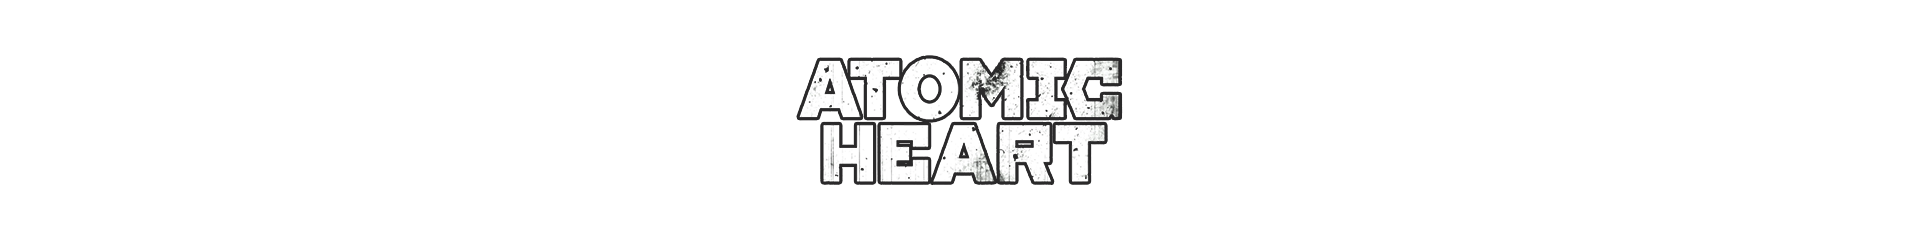 Atomic Heart Titulo.png